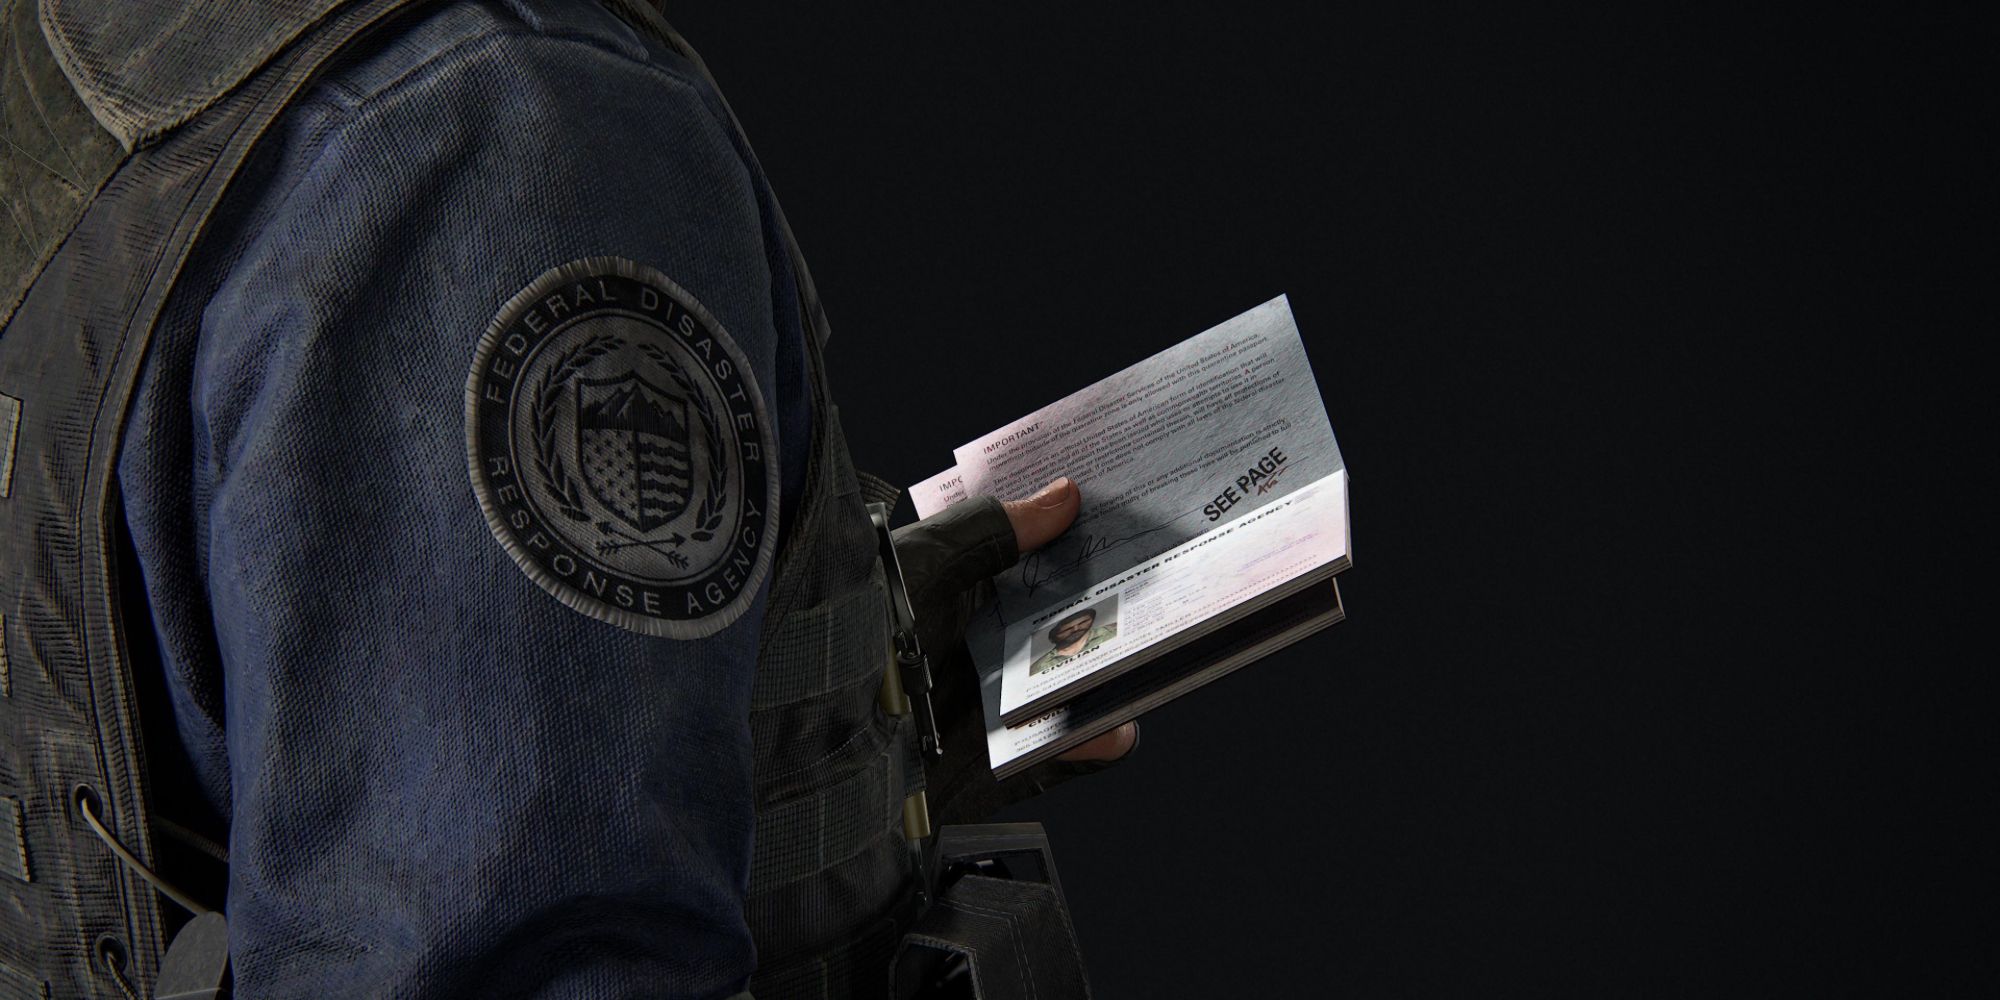 A FEDRA Guard holding Joel's ID papers.